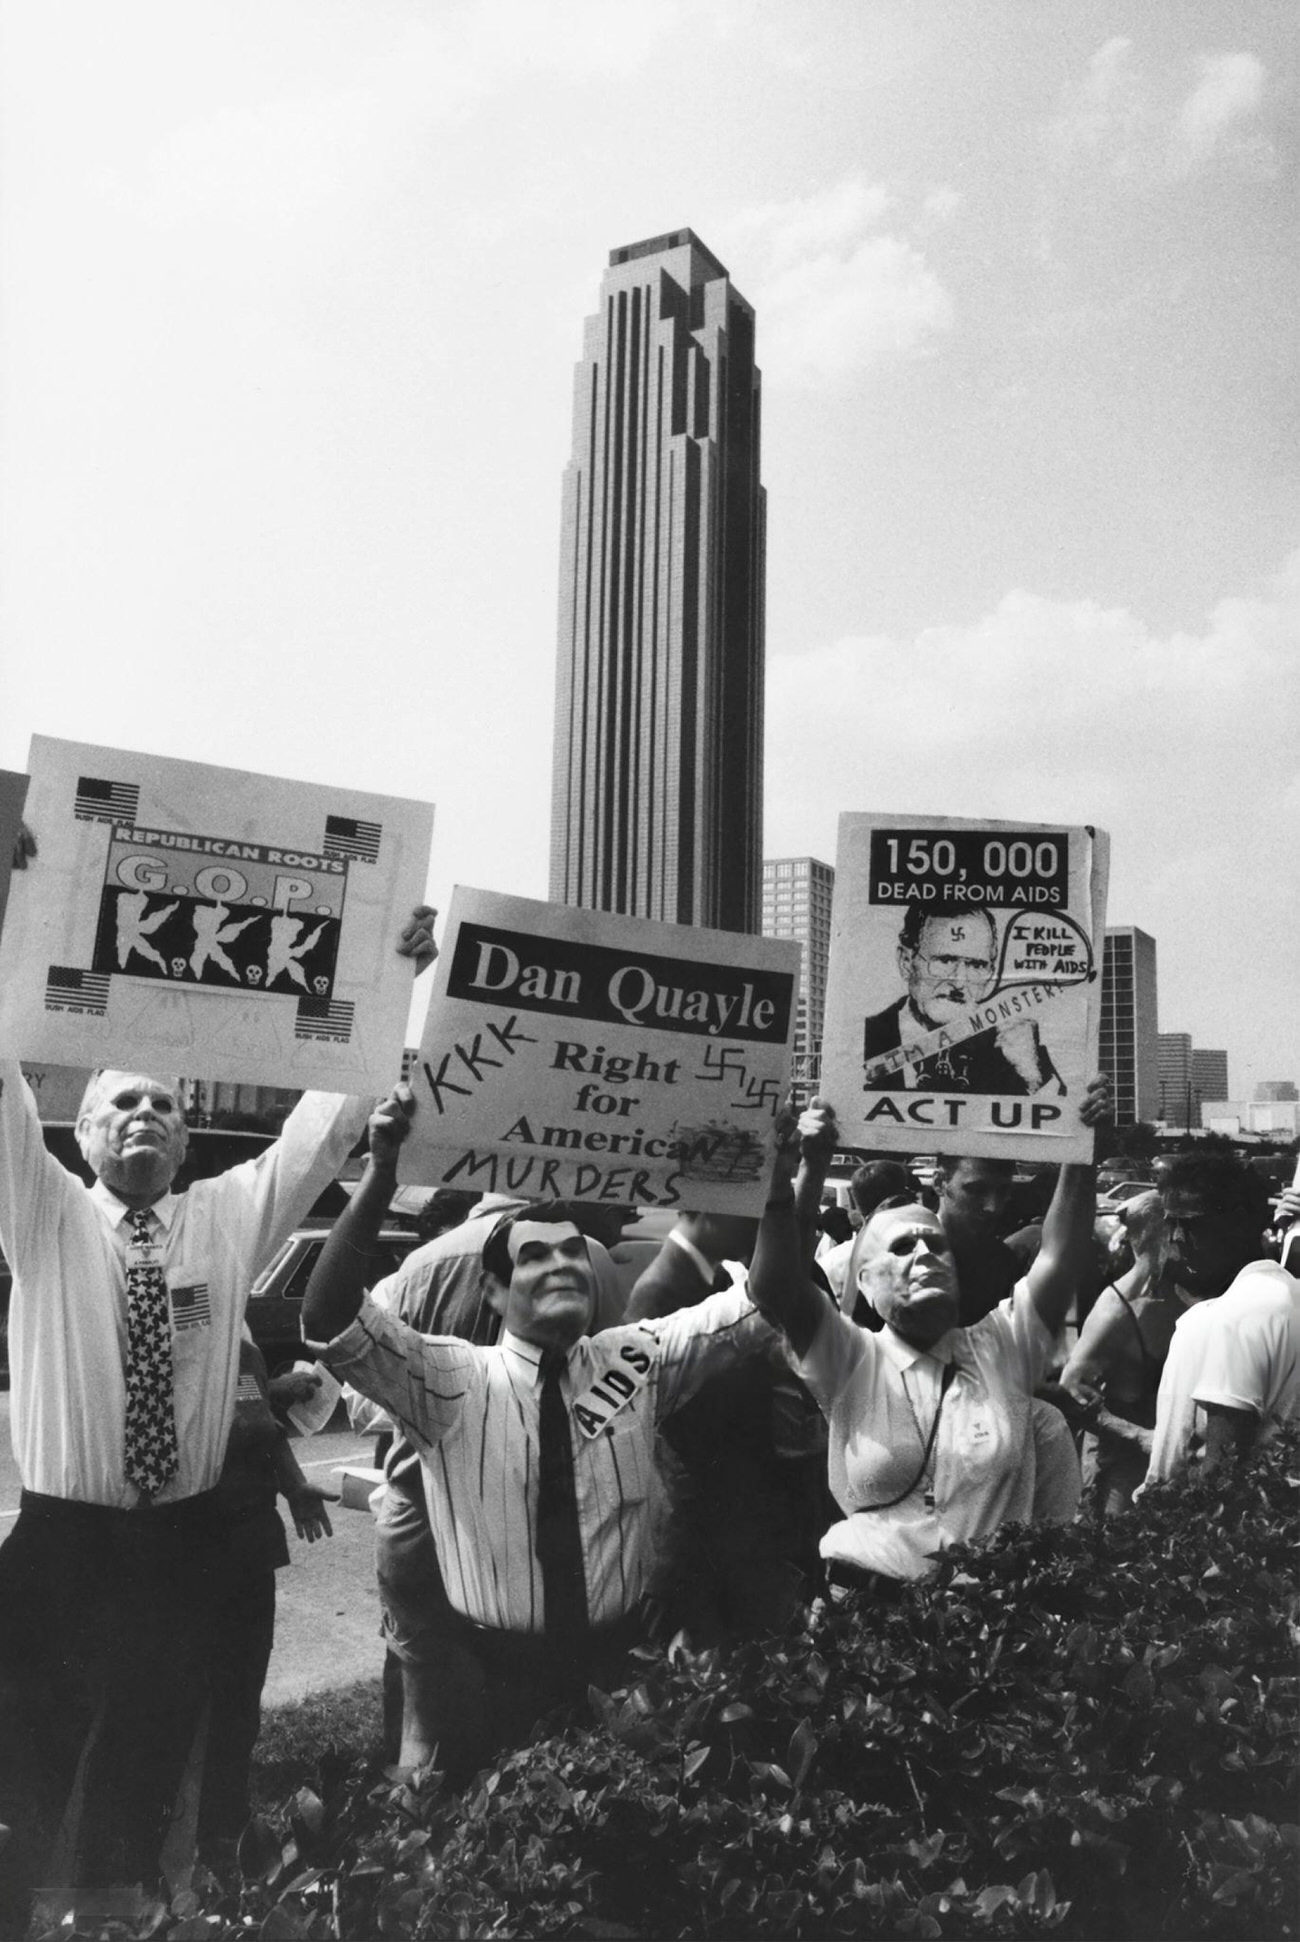 ACT UP activists' protest on August 20, 1992, wearing Ronald Reagan and George H.W. Bush masks, criticizes government inaction on AIDS and conservative policies, showcasing the era's political and health activism, Houston, Texas.